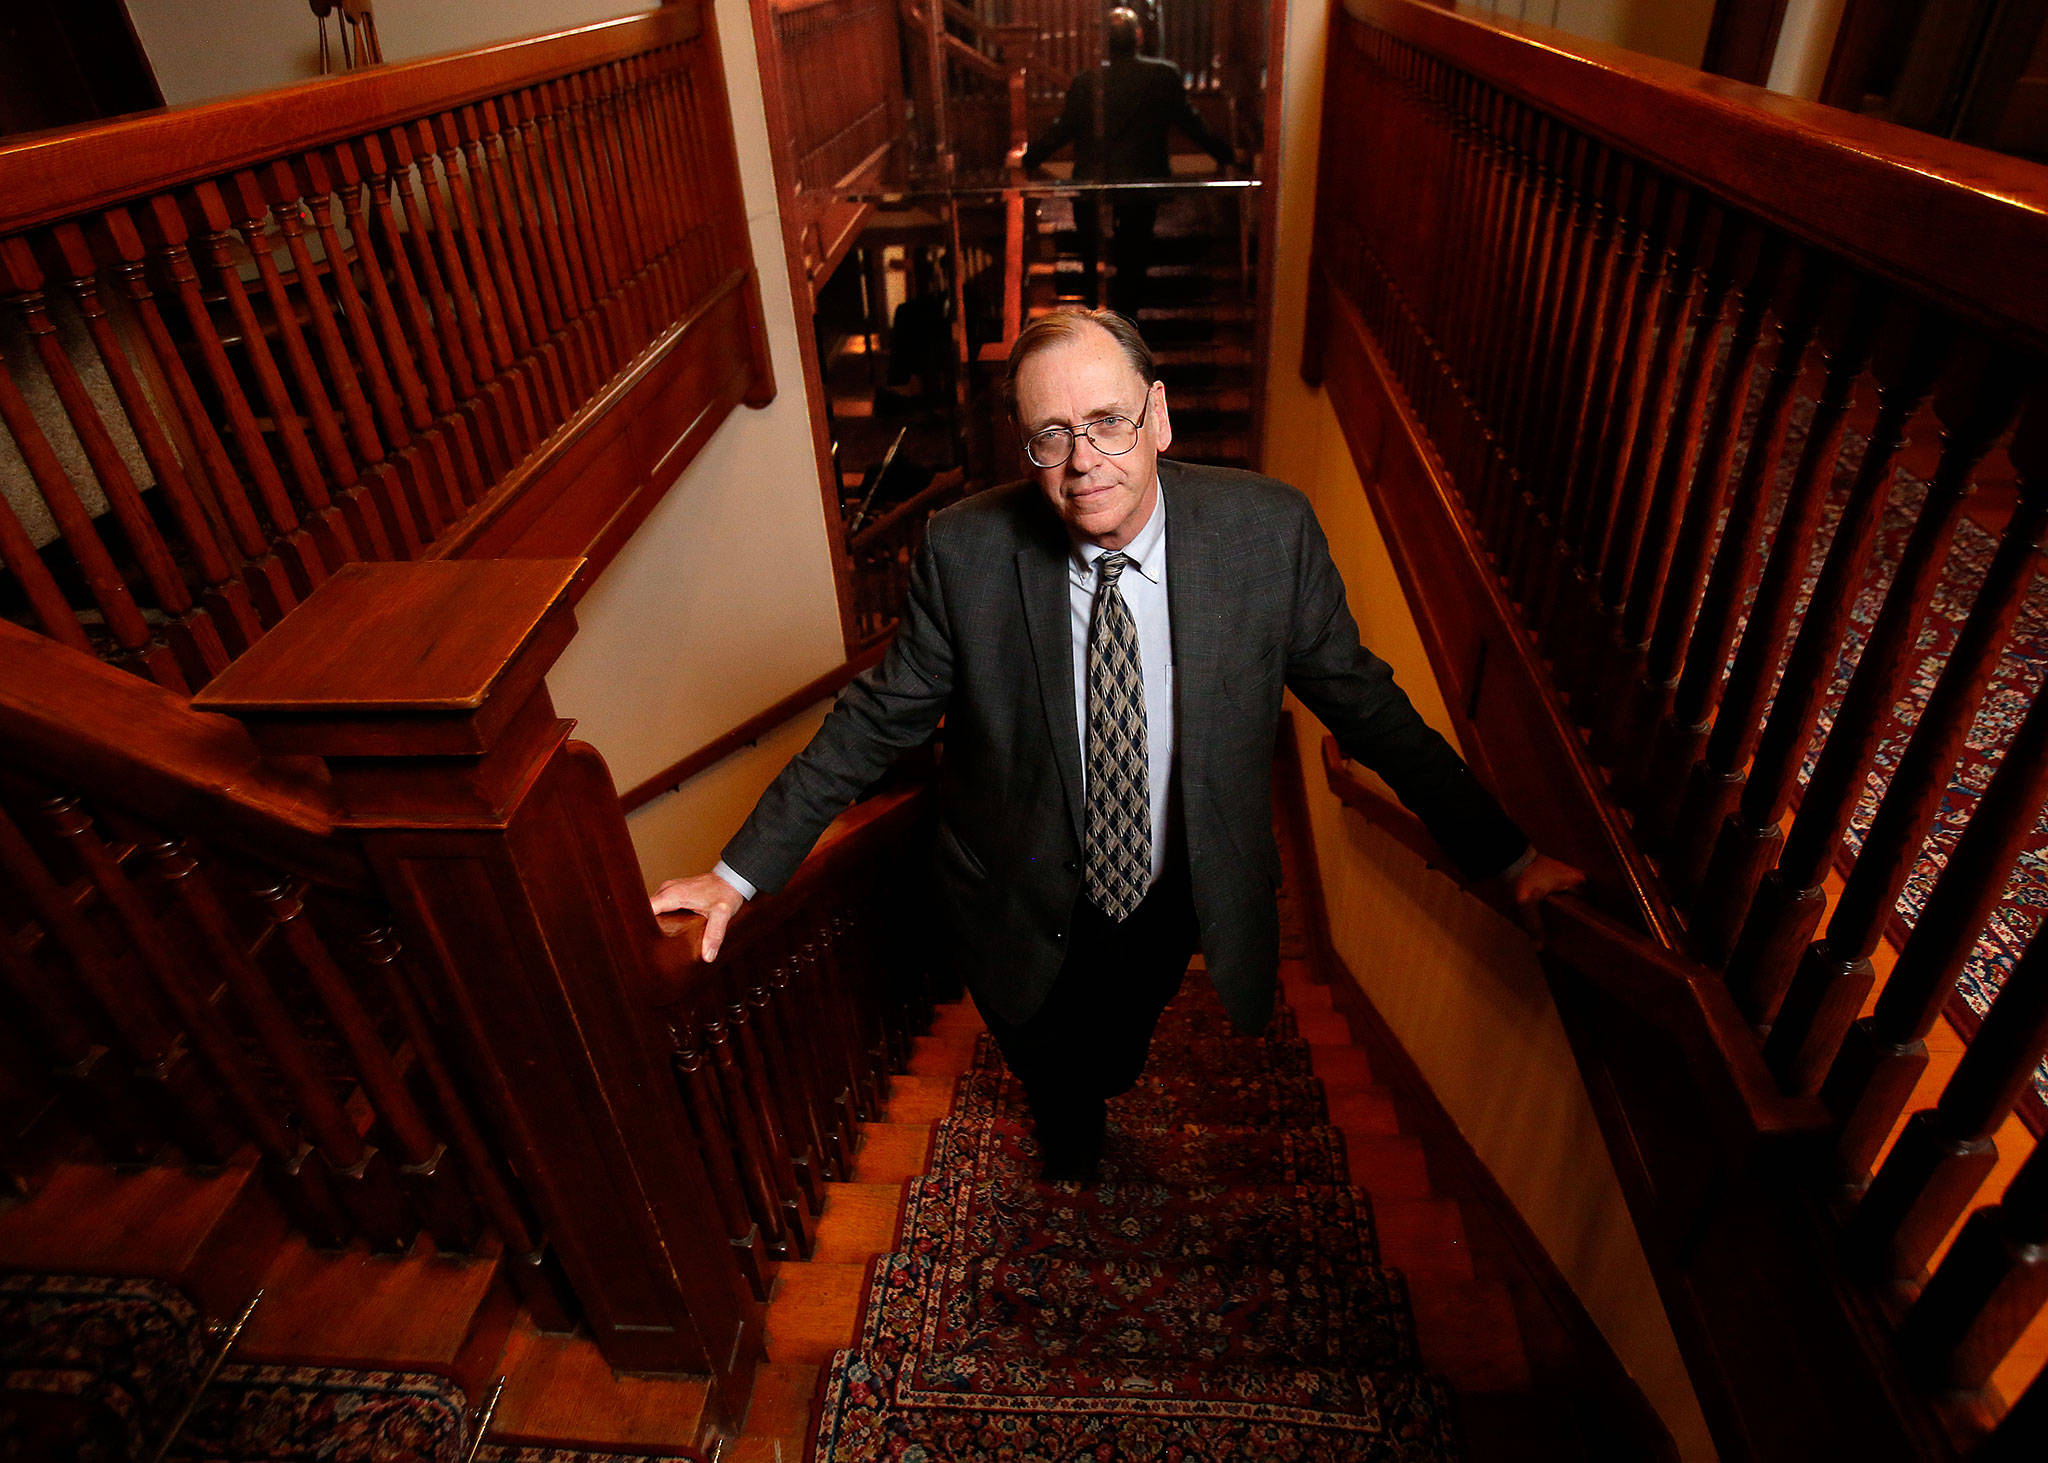 Dr. Sanford Wright climbs the staircase in Everett’s historic Hartley Mansion recently. This will be the 17th year for the Christmas Spectacular, an entertainment program spearheaded by Dr. Wright that provides a big boost to food banks and other nonprofits. (Dan Bates / The Herald)